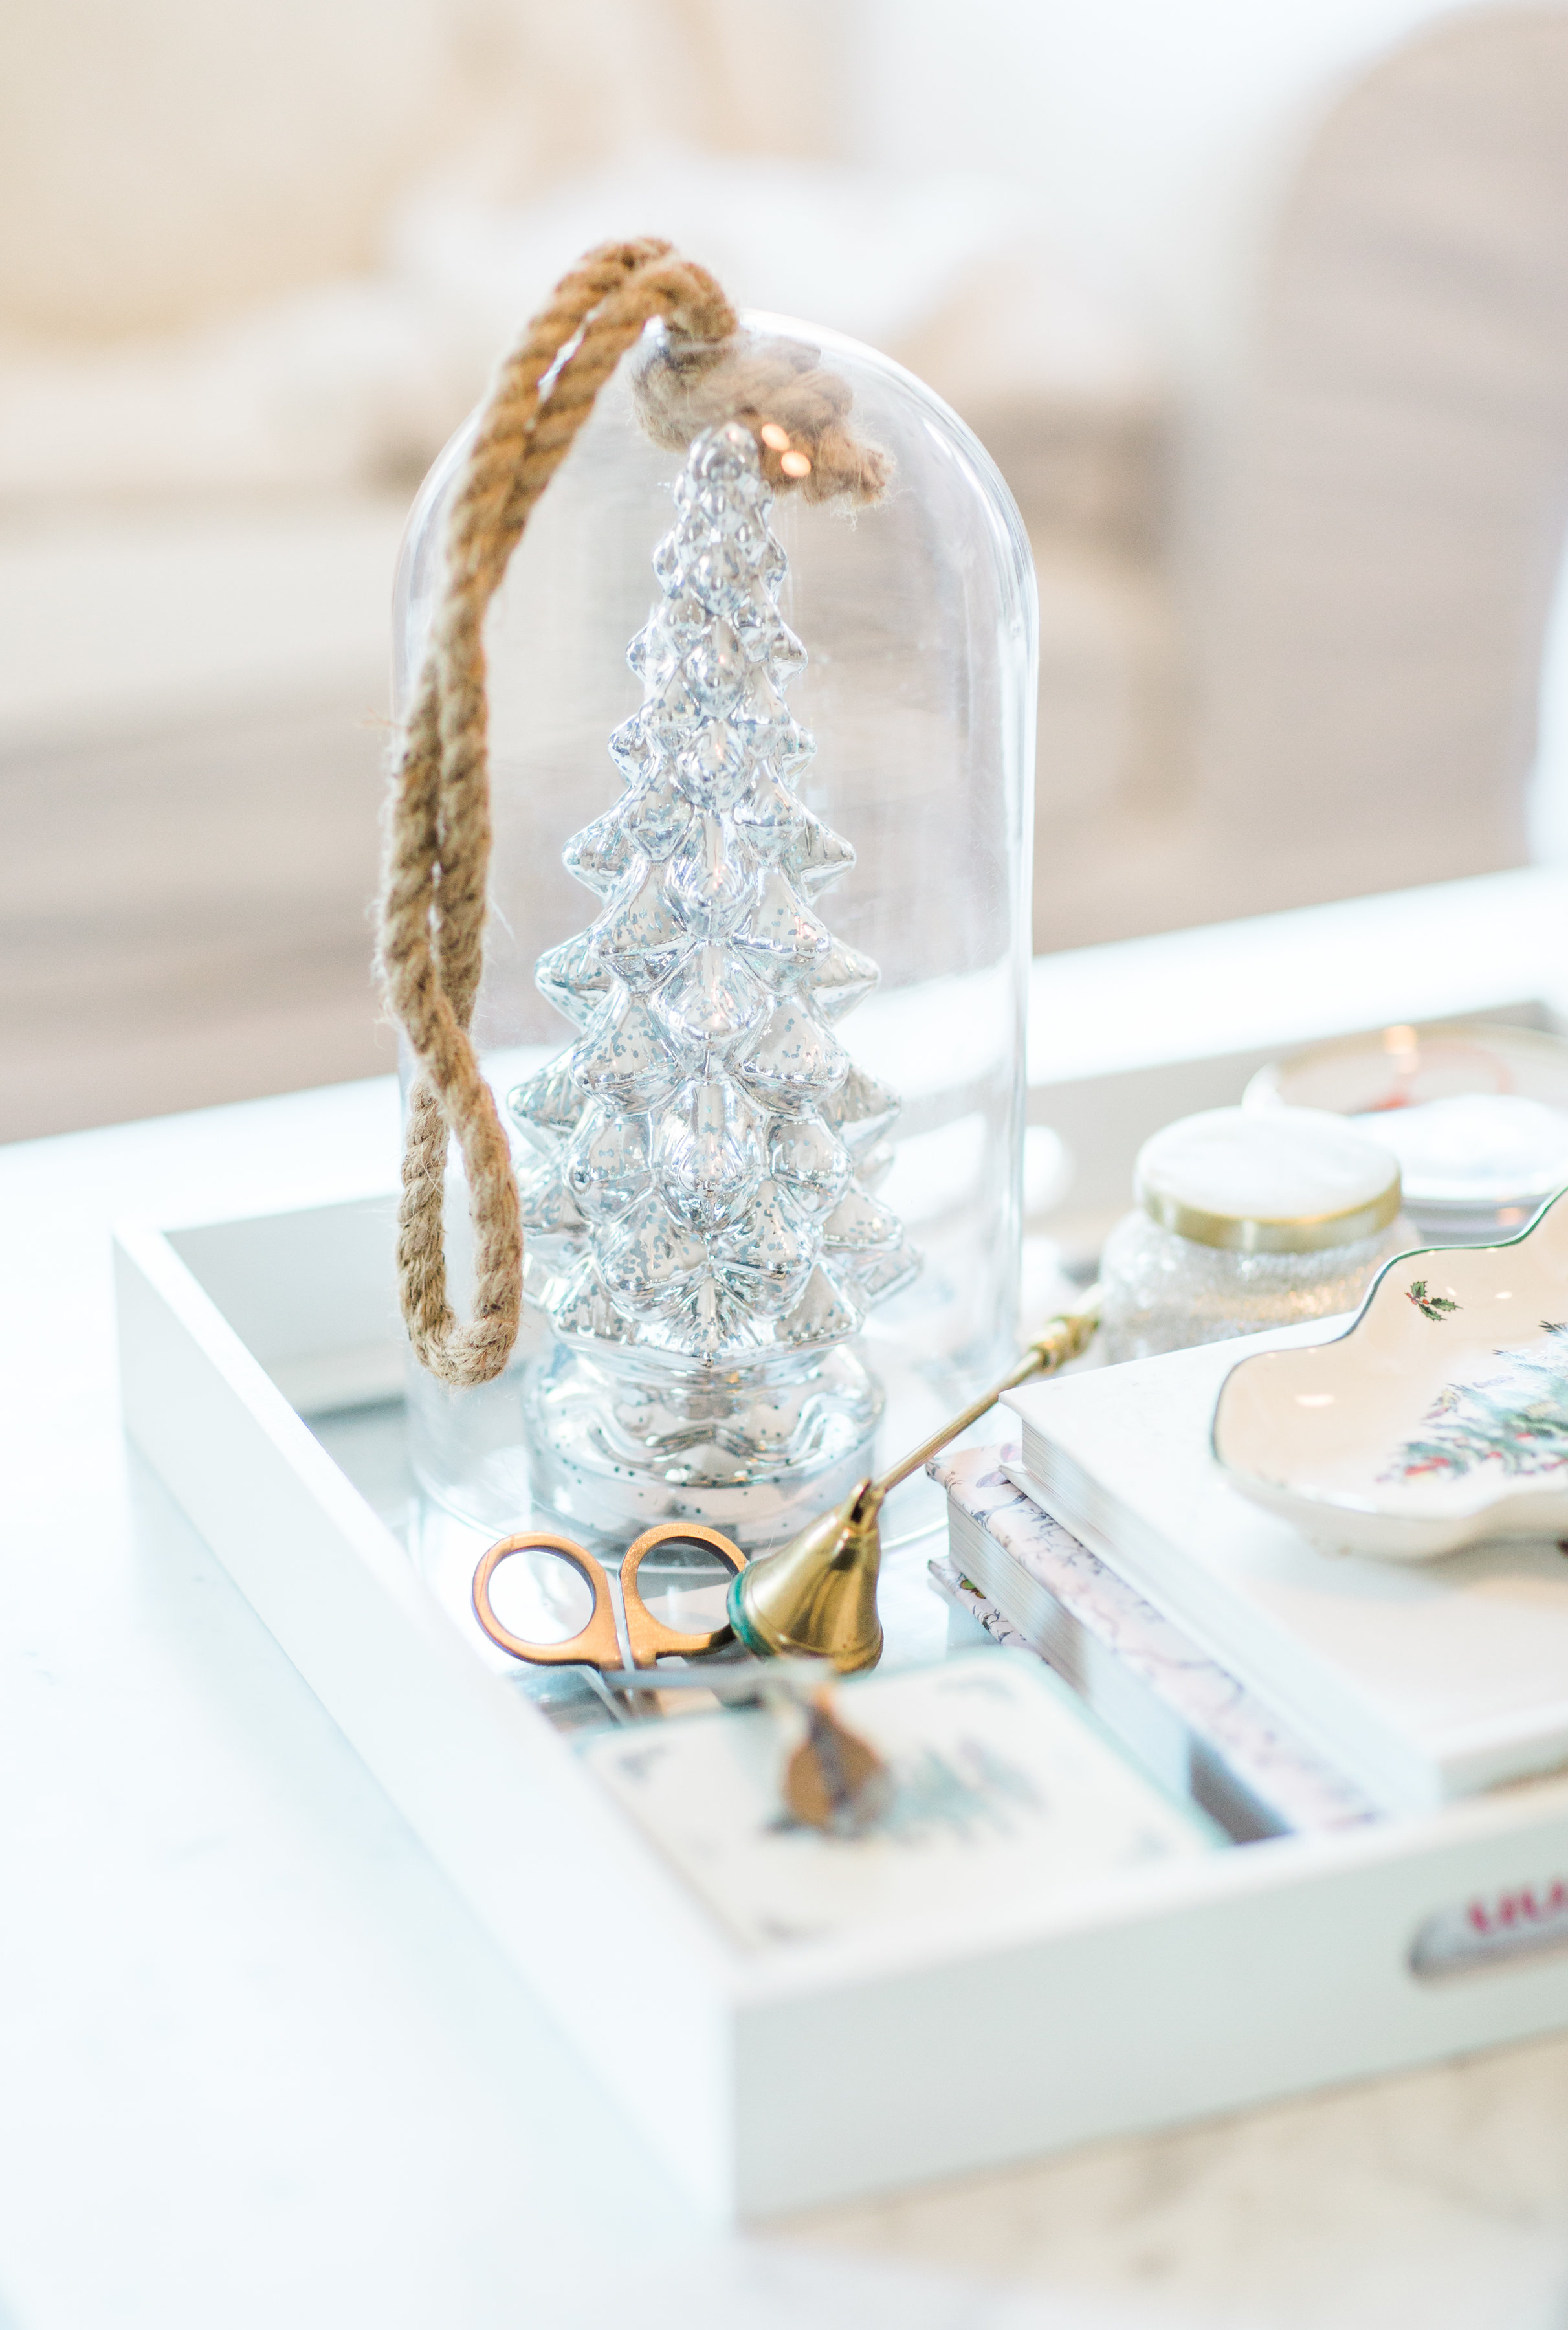 Our Christmas Home Decor by North Carolina style blogger Coffee Beans and Bobby Pins